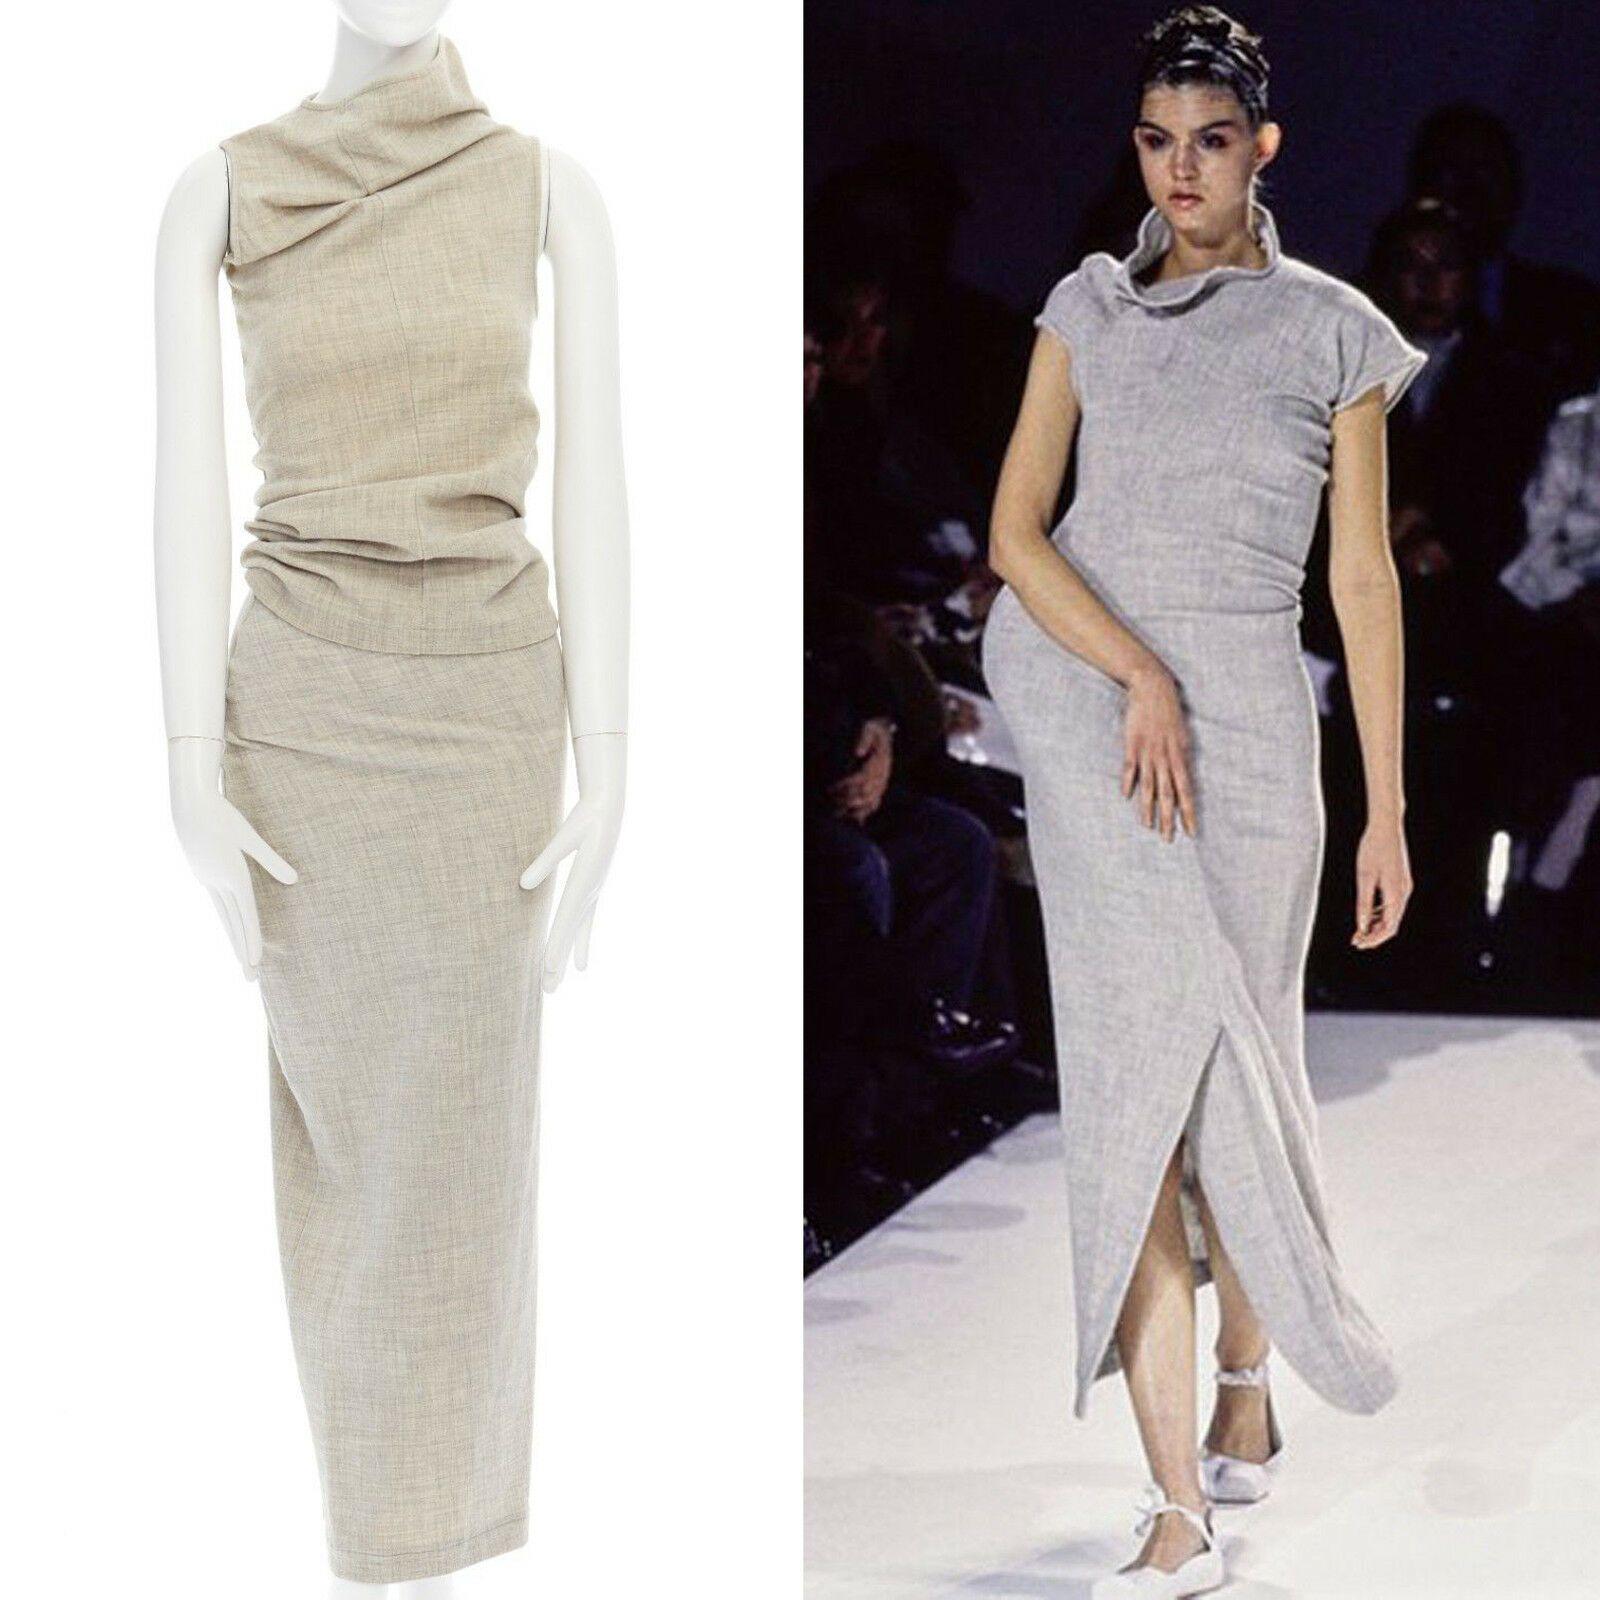 COMME DES GARCONS Vintage SS1997 Lumps & Bumps grey asymmetric top skirt M US6
COMME DES GARCONS
FROM THE ICONIC 1996 LUMPS AND BUMPS COLLECTION
WOOL, NYLON, POLYURETHANE . 
LIGHT GREYISH BEIGE . 
ASYMMETRIC CUT NECKLINE AND SLEEVES . 
SEA M DOWN